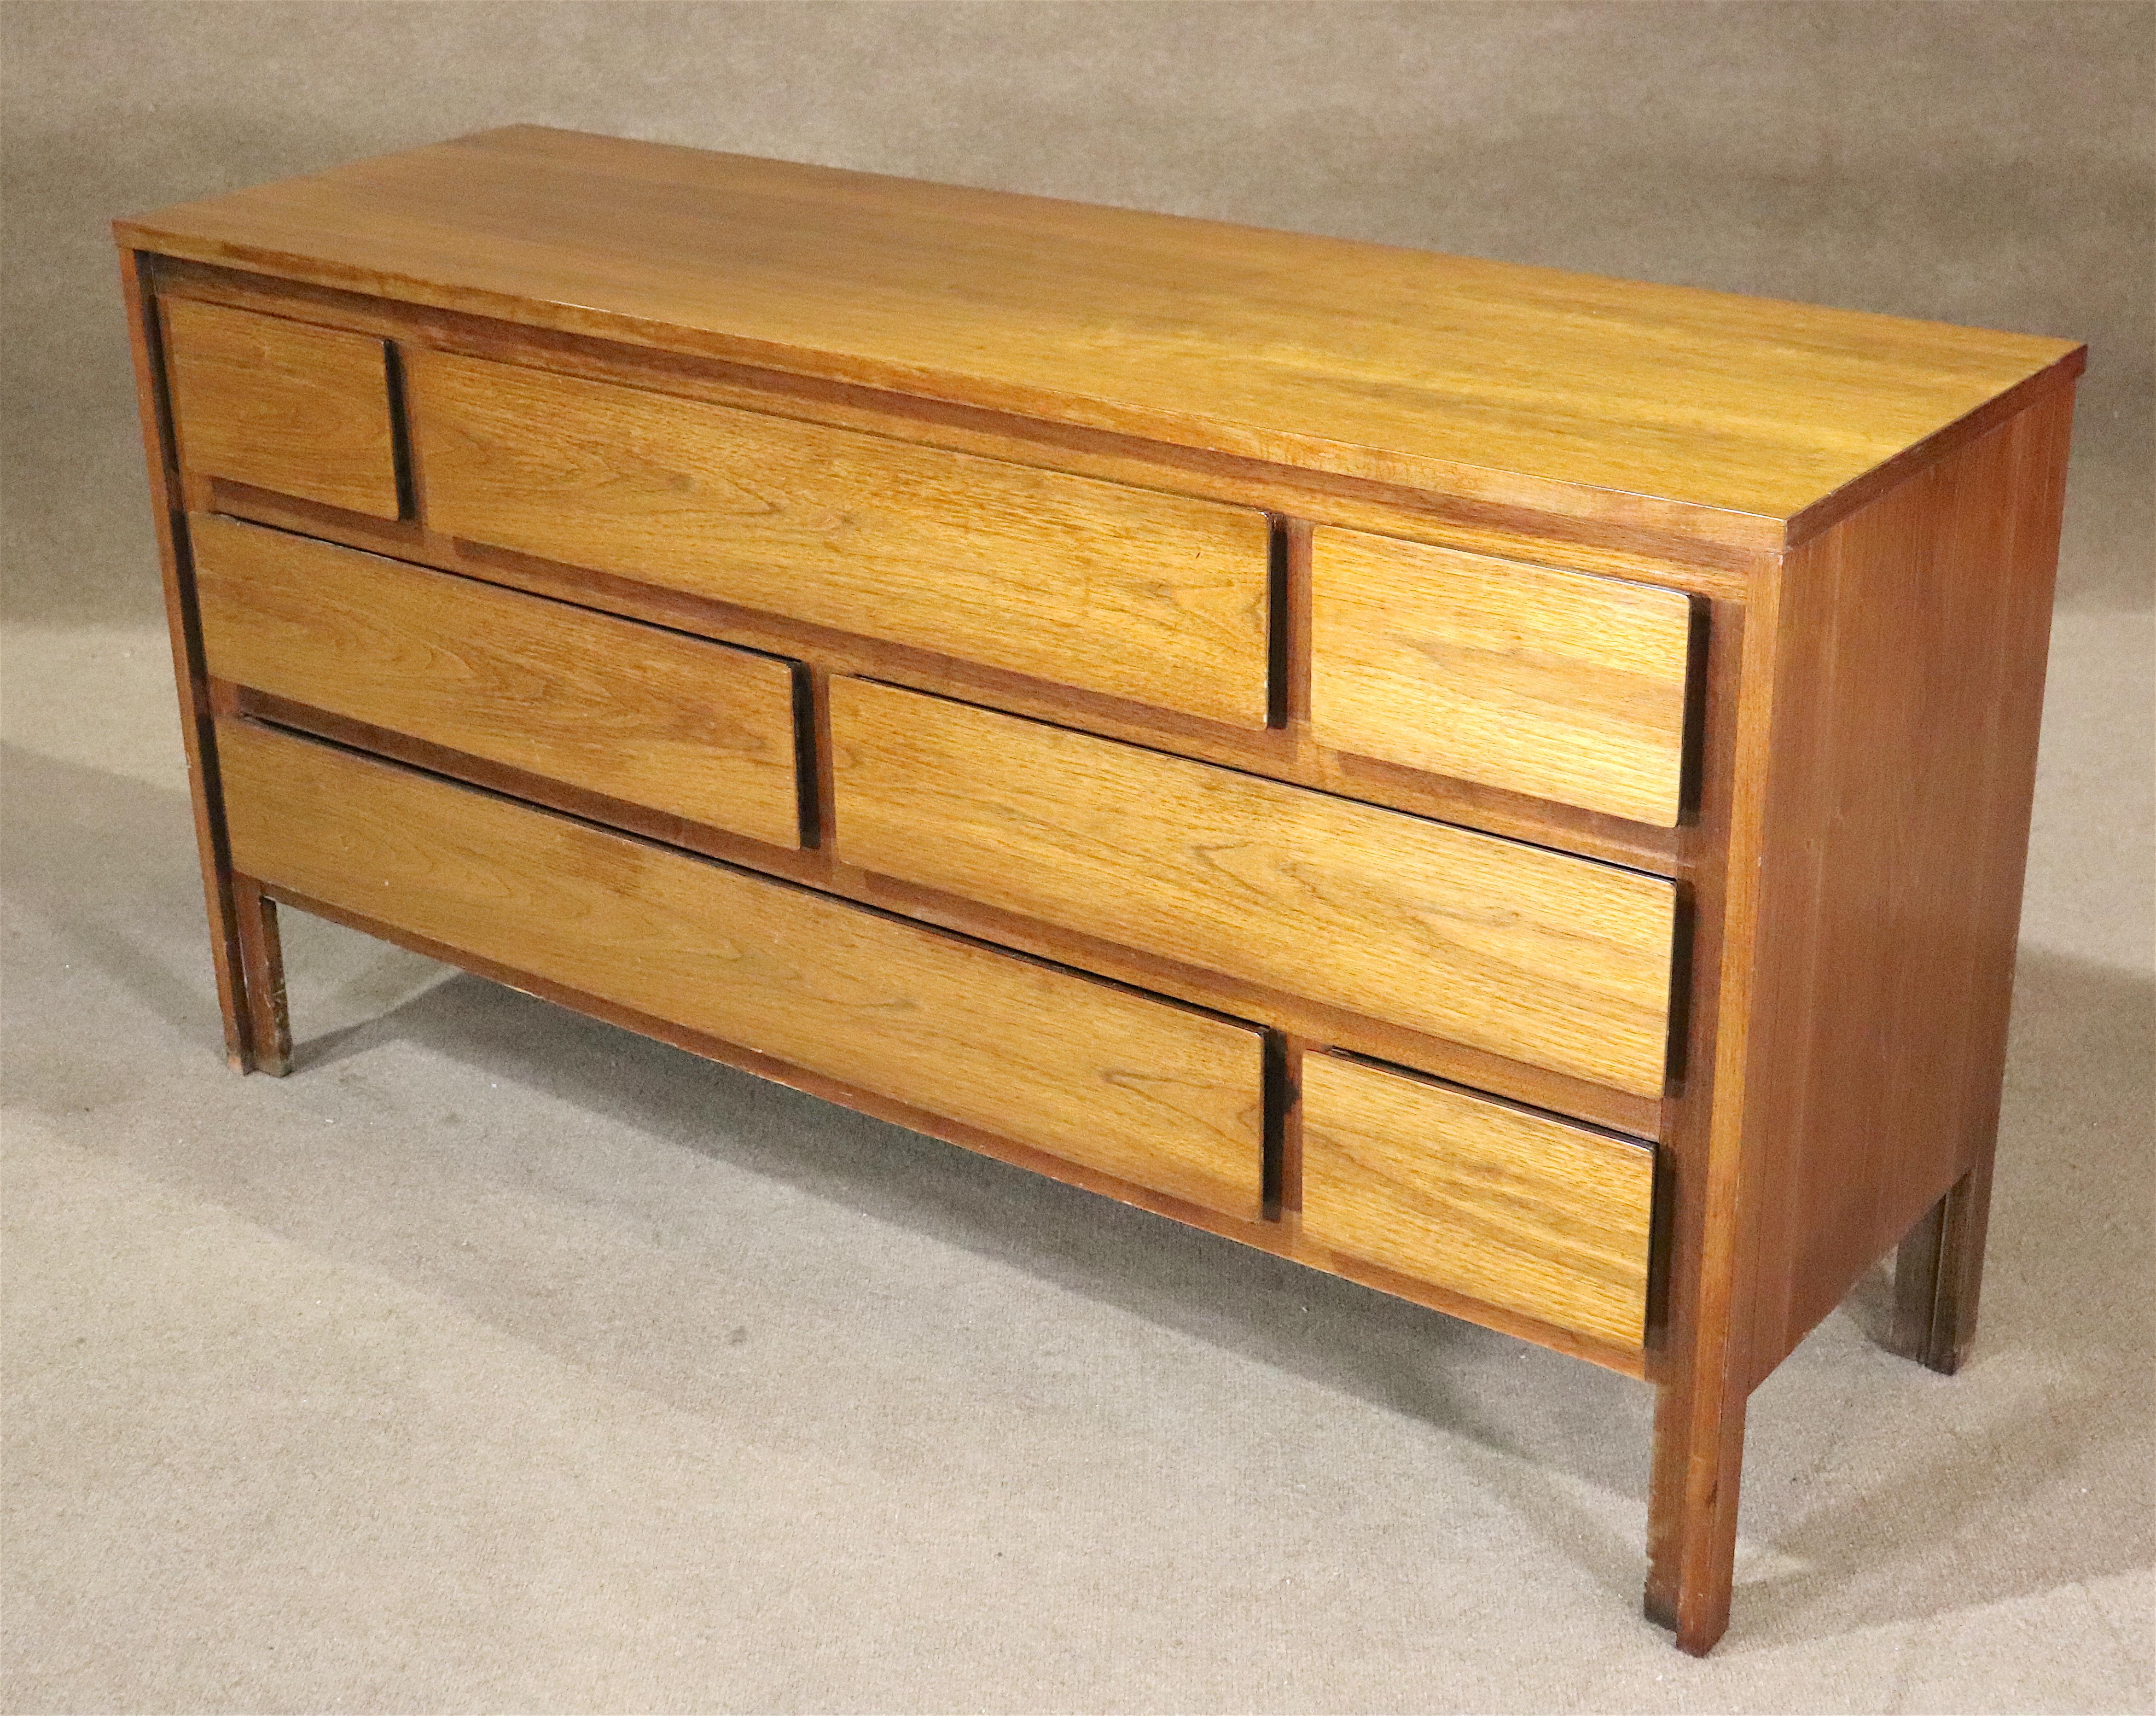 This stylish mid-century modern dresser is so much fun in it's design! Seven total drawers in a geometric design, borrowed from the famous designs of Gio Ponti. Made in strong wood by Henredon Furniture.
Please confirm location NY or NJ